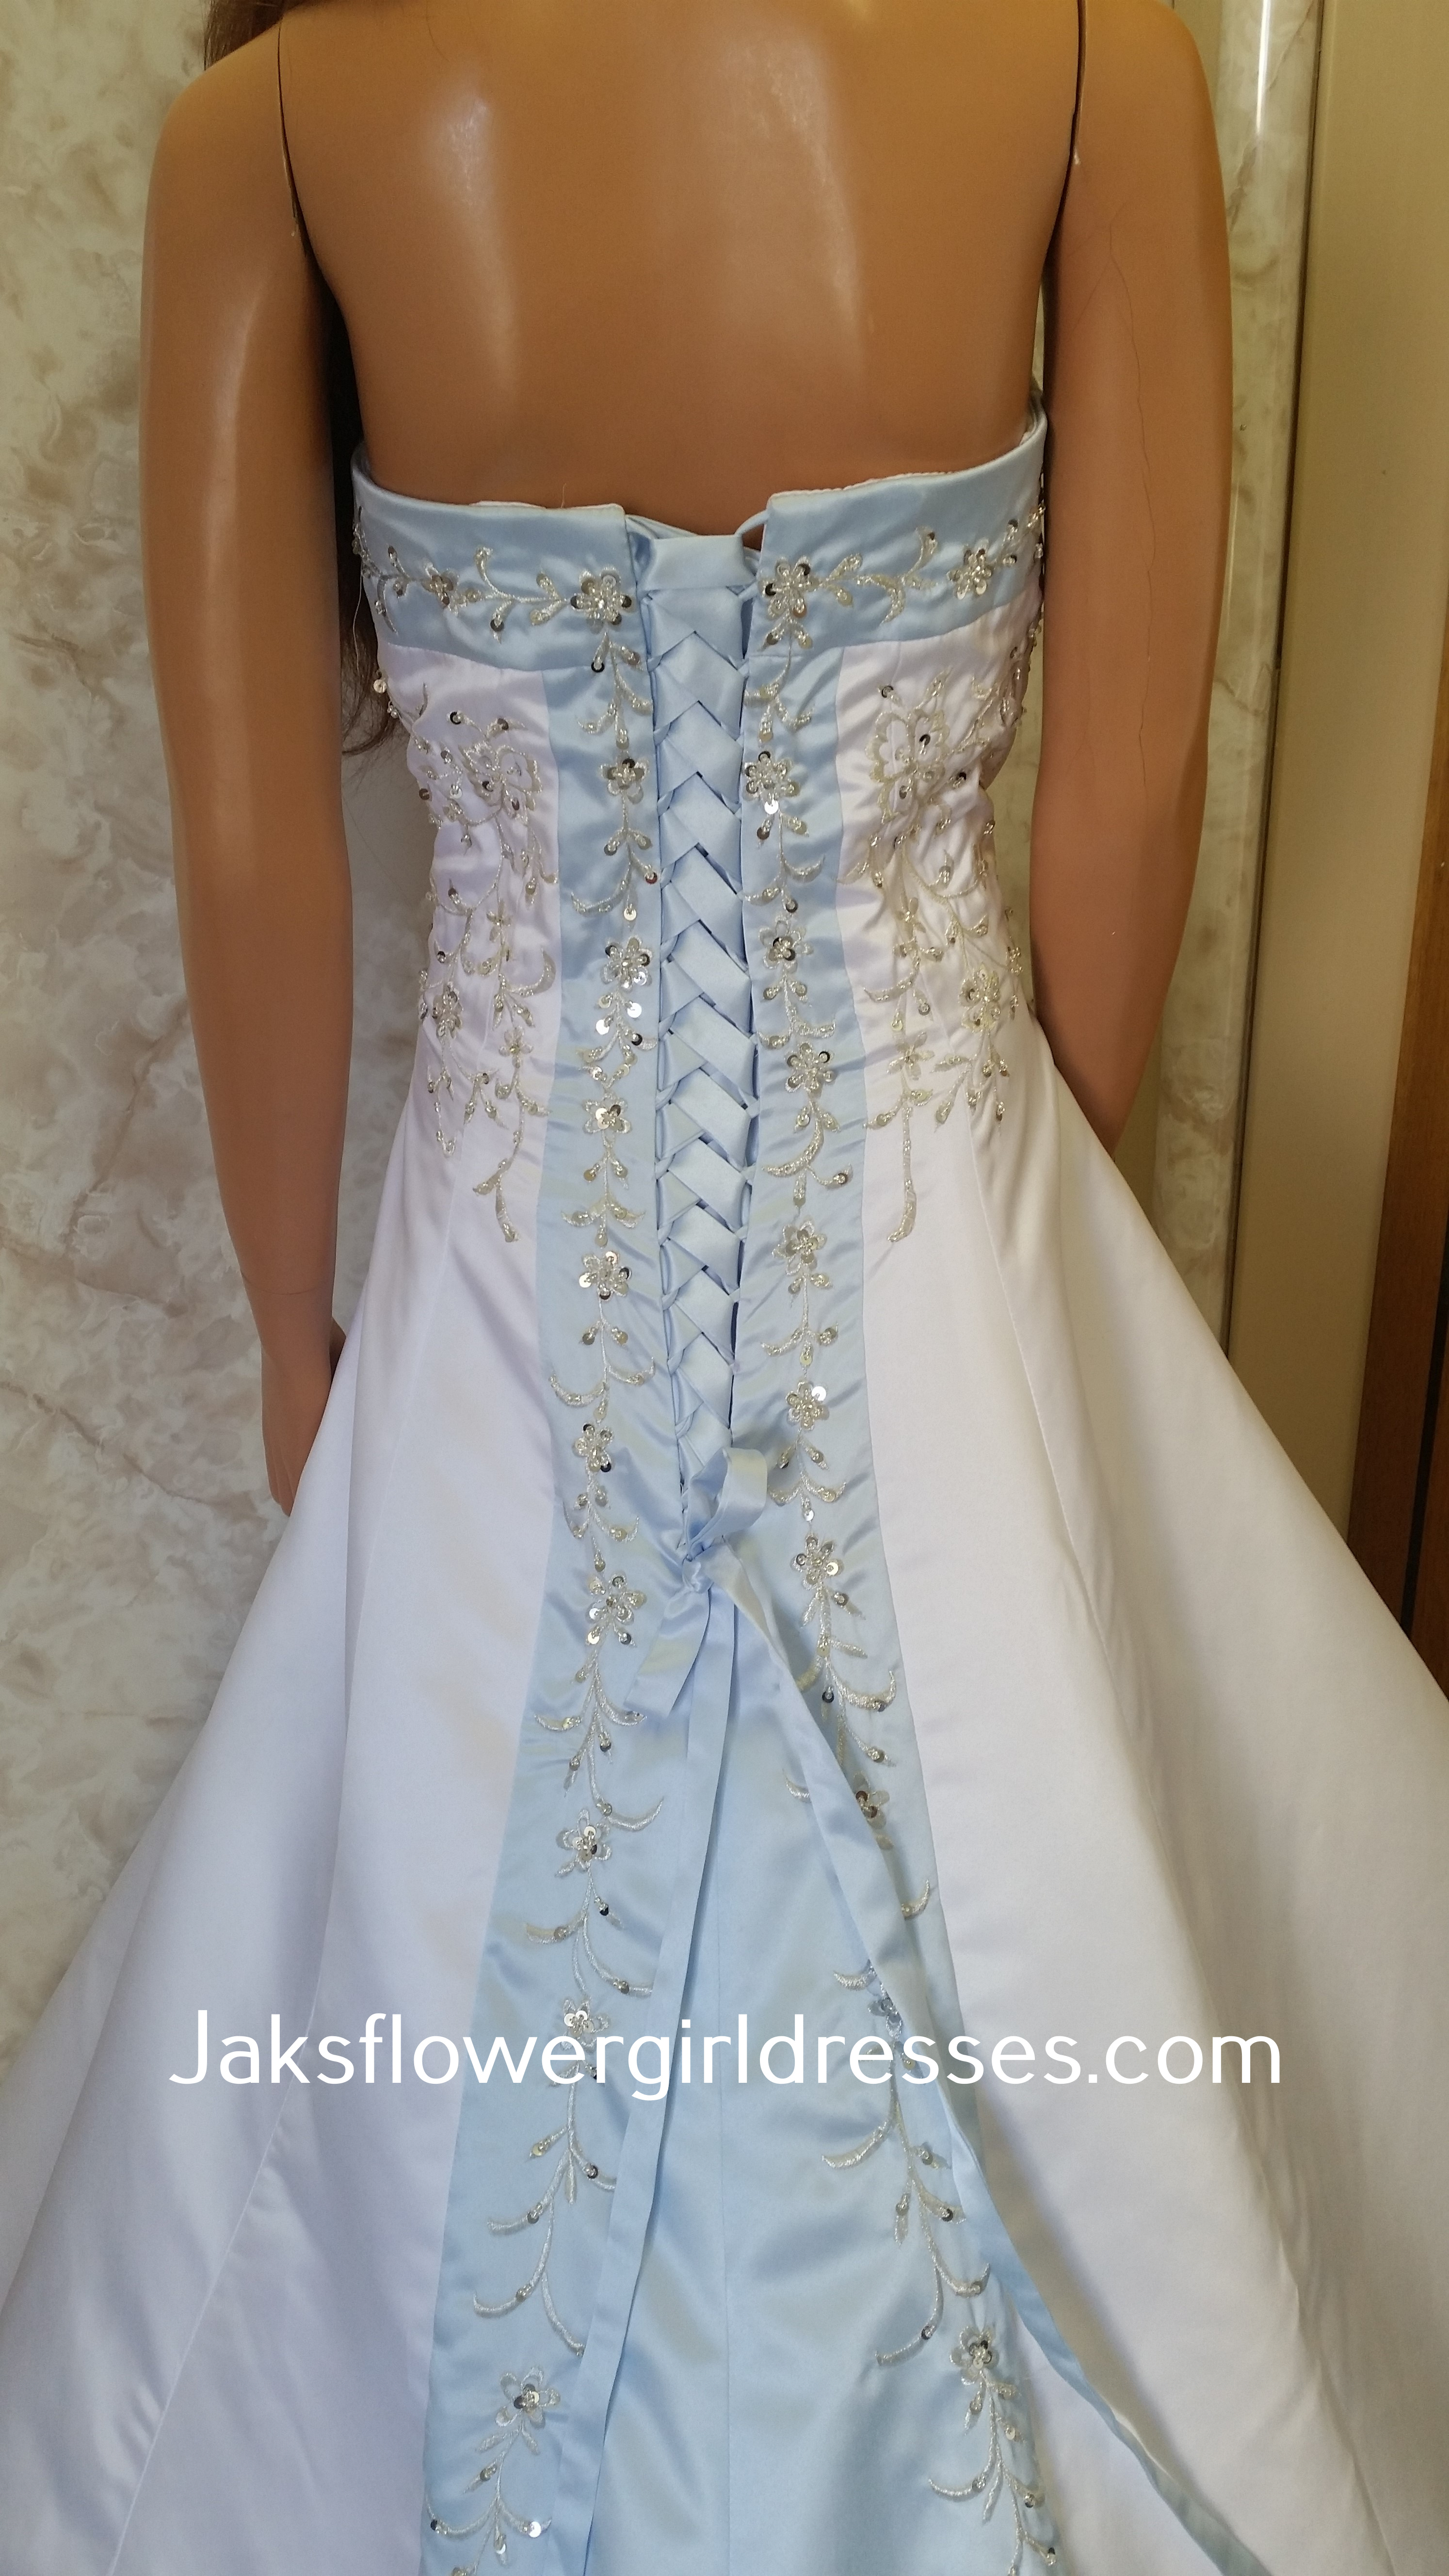 White dress for wedding flower girls. Light blue trimmed neckline, lace up back and chapel train with beaded embroidery.